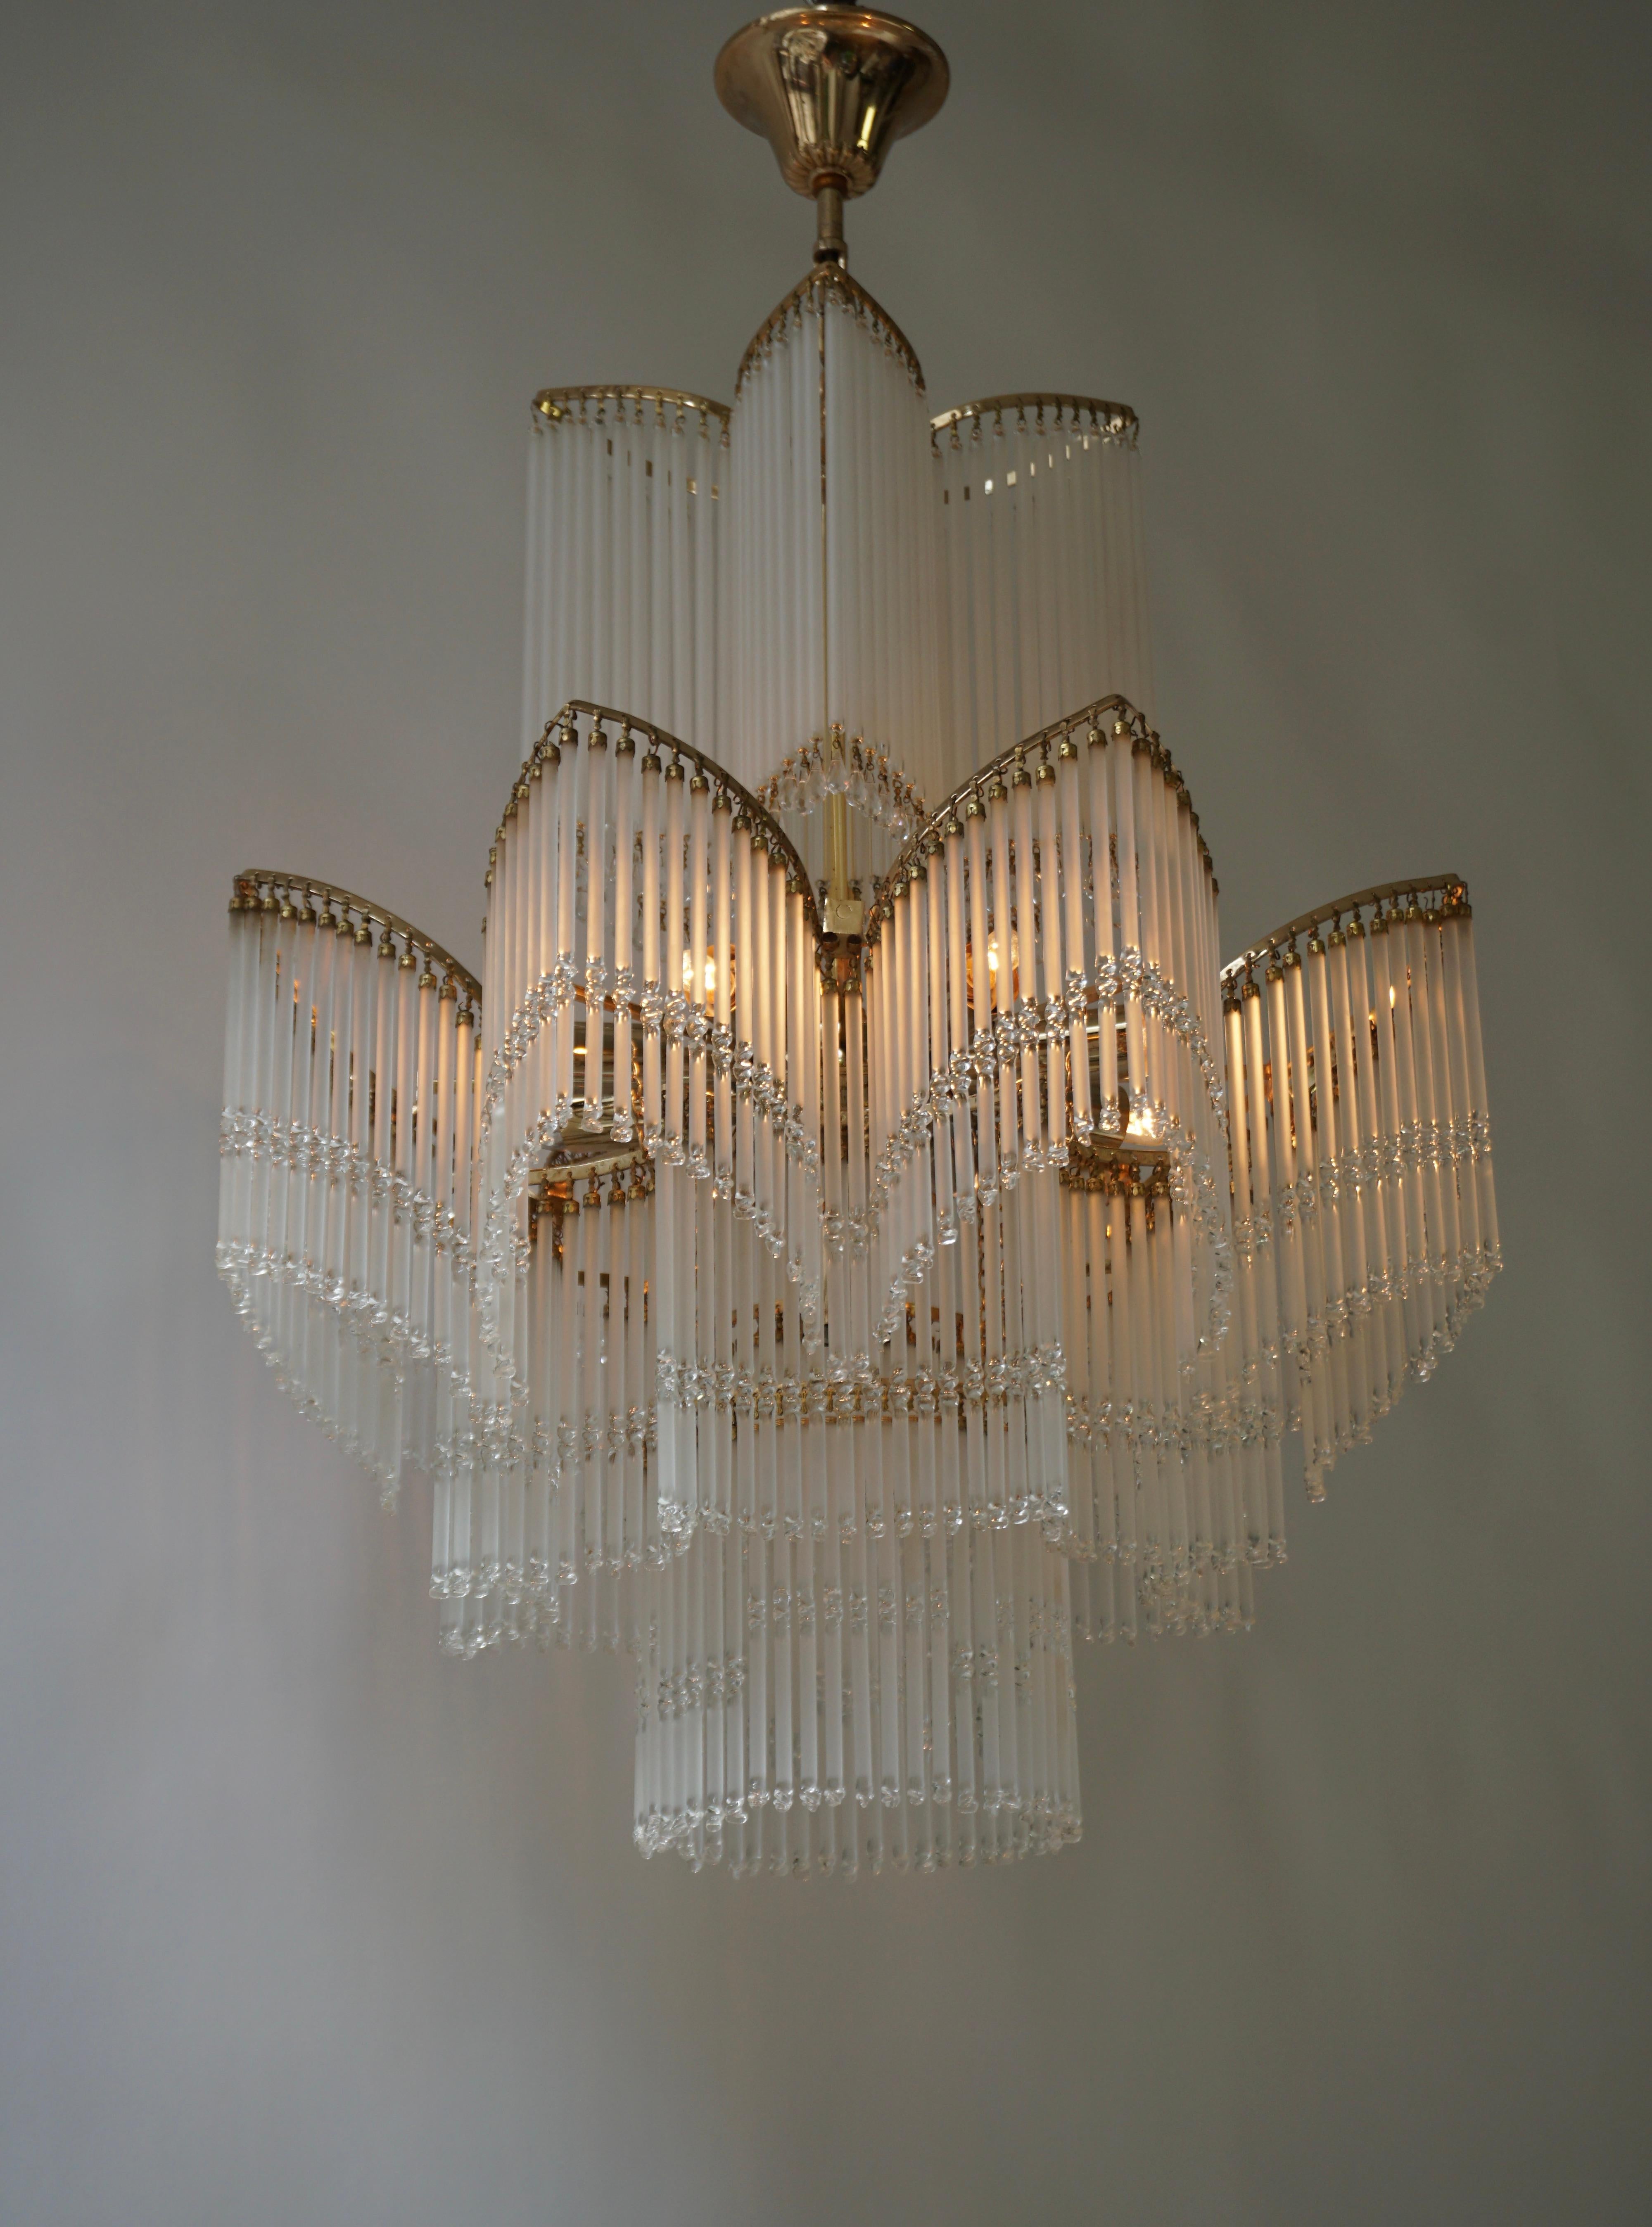 20th Century Italian Hollywood Regency Style Murano Glass and Brass Chandelier For Sale